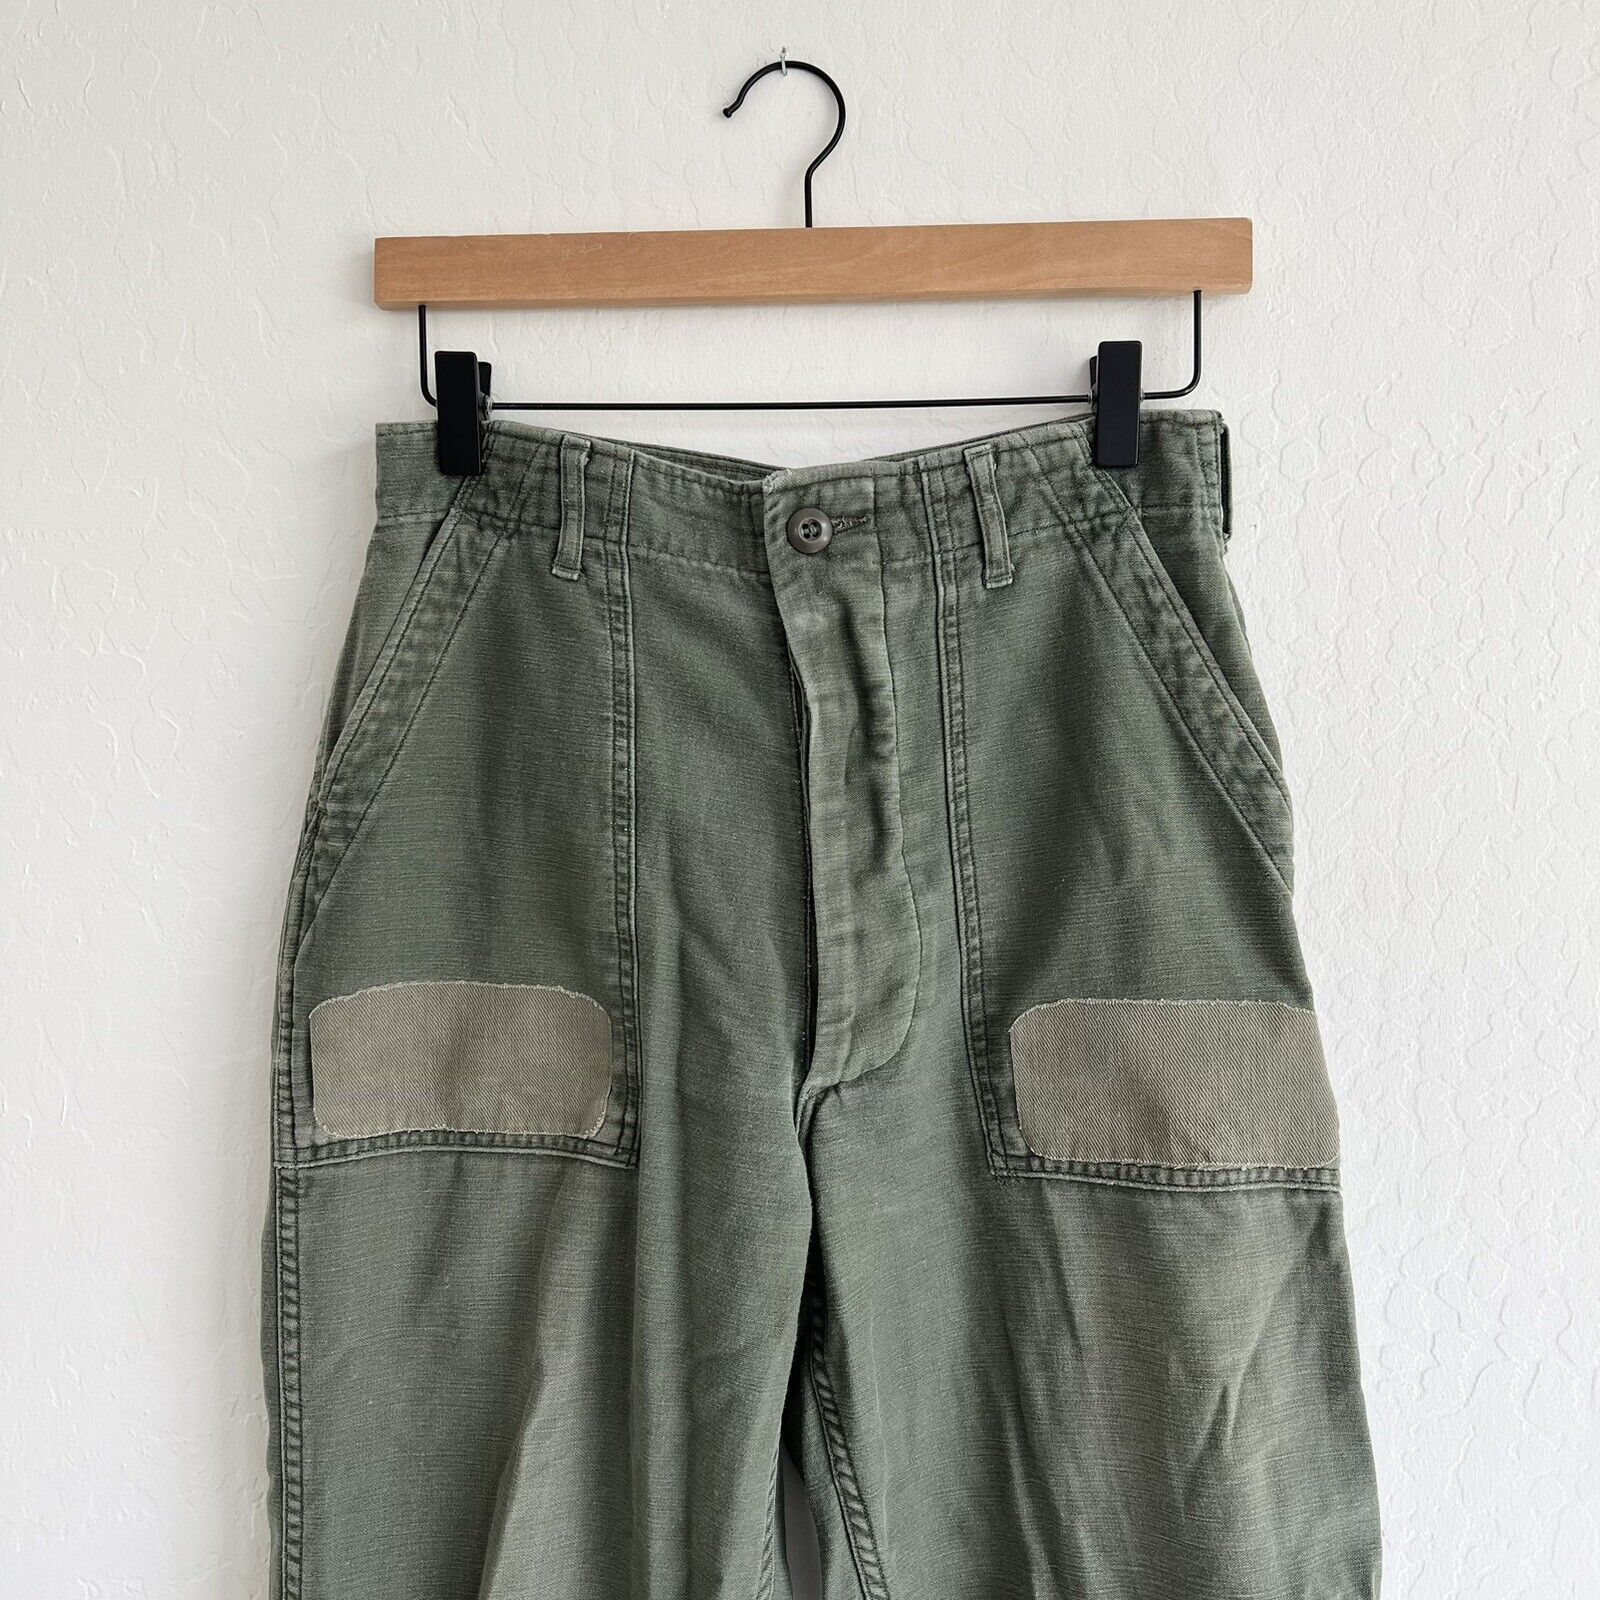 Vintage OG-107 Sateen Utility Pants Size 27 x 26 Military Green Trousers Vietnam